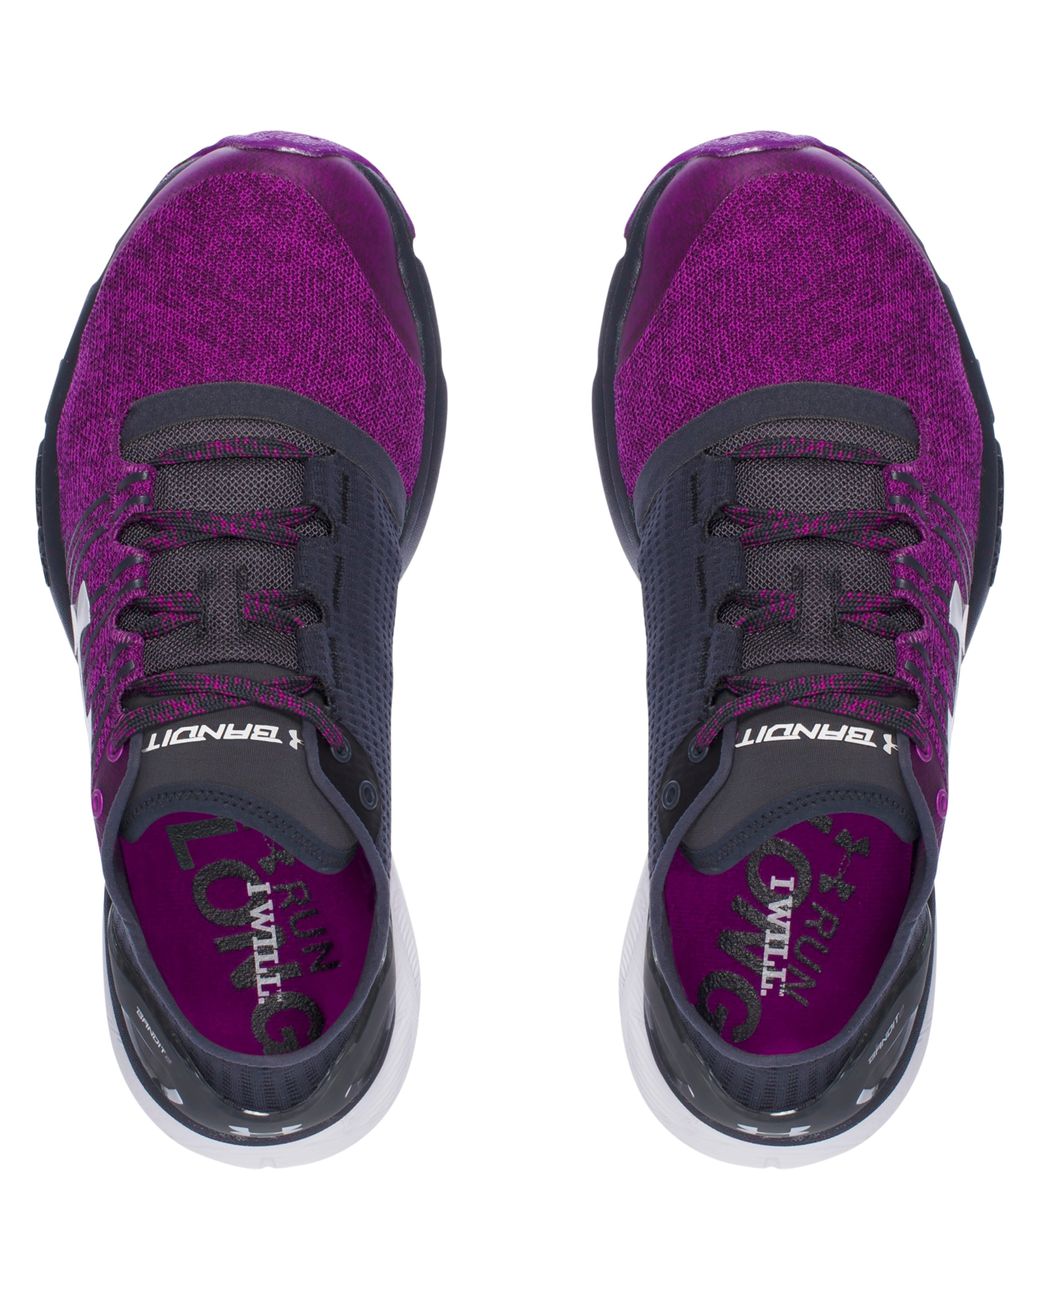 Under Armour Women's Ua Charged Bandit 2 Running Shoes in Purple